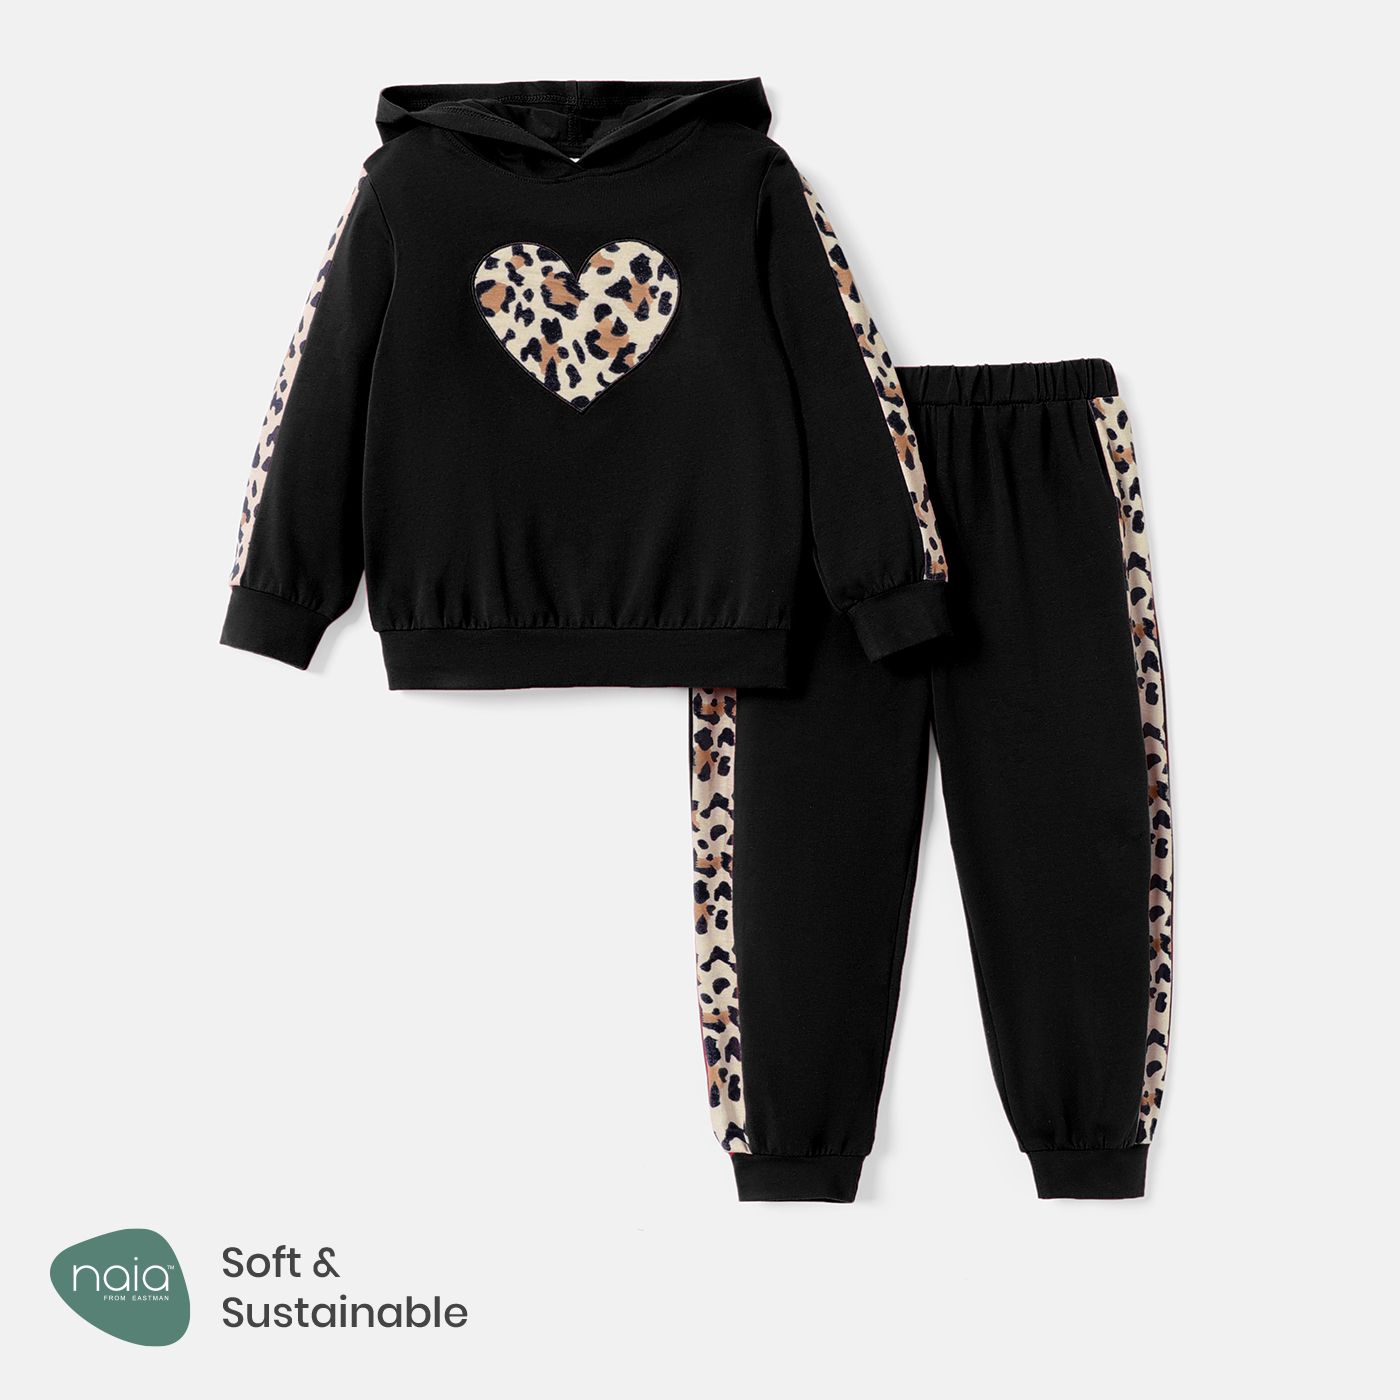 2pcs Toddler Girl Naia Leopard Print Heart Embroidered Ear Design Hoodie Sweatshirt And Pants Set